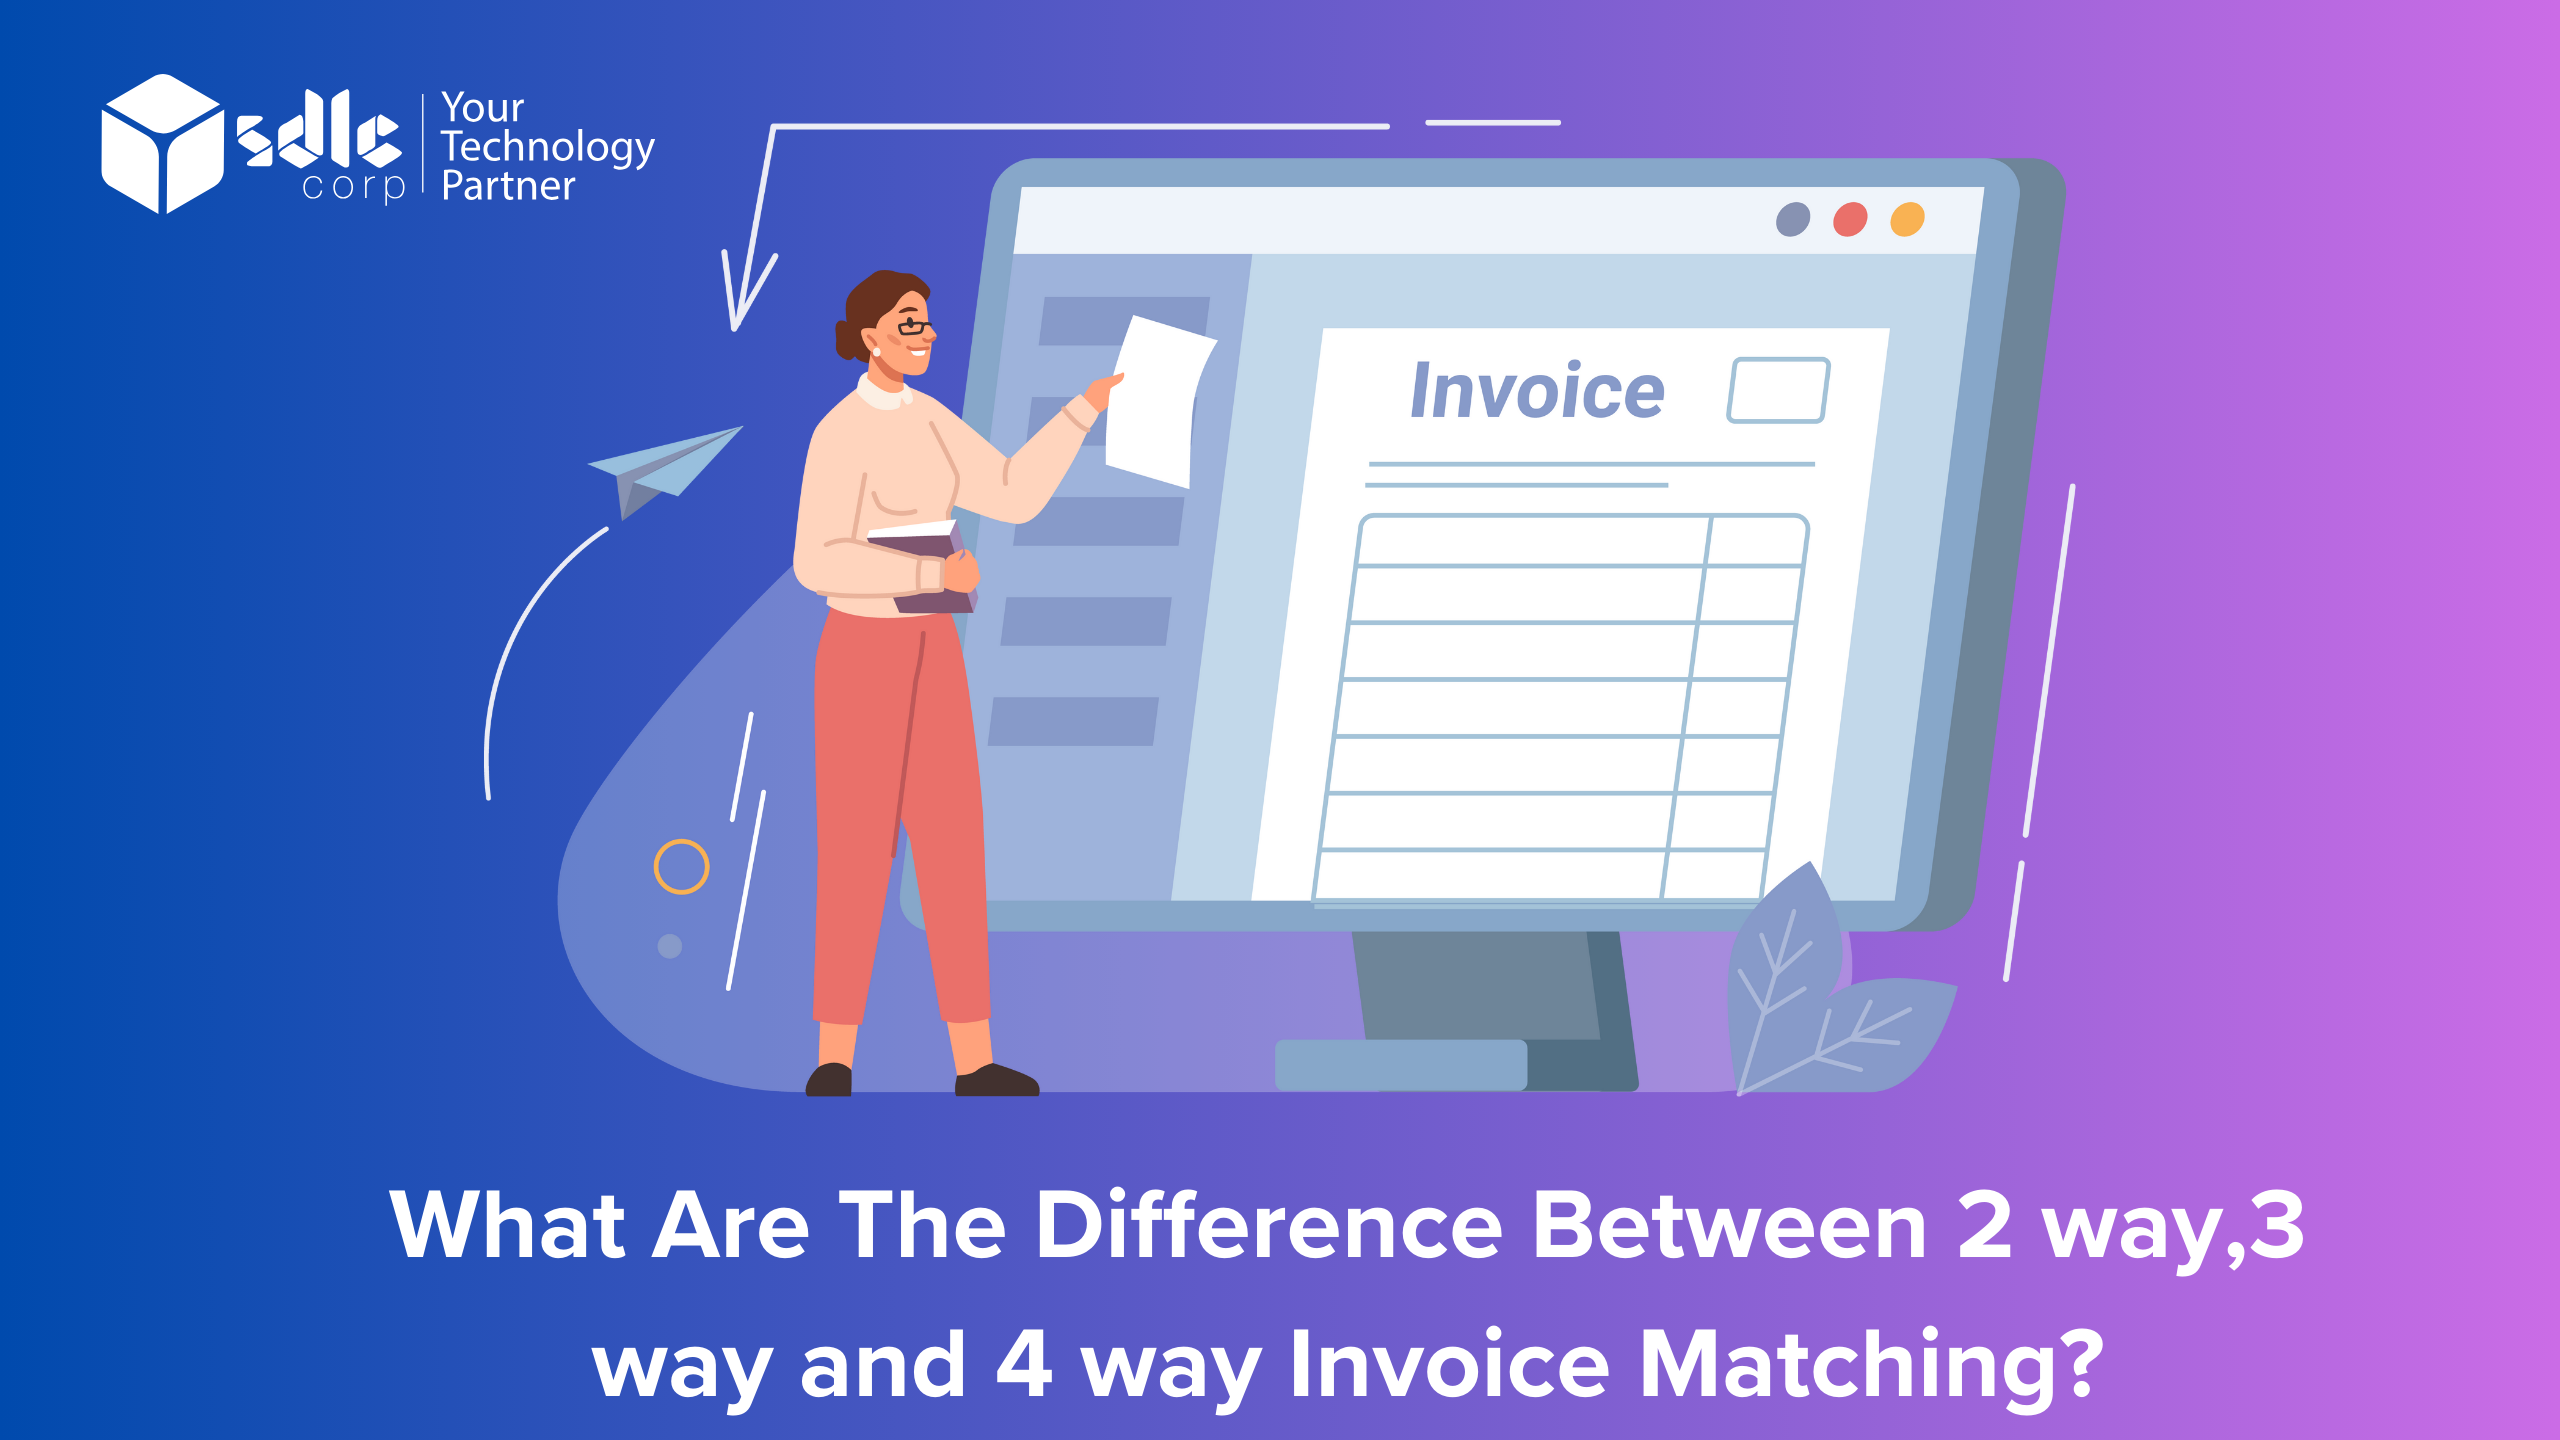 What are the difference Between 2 way , 3 way and 4 way invoice matching